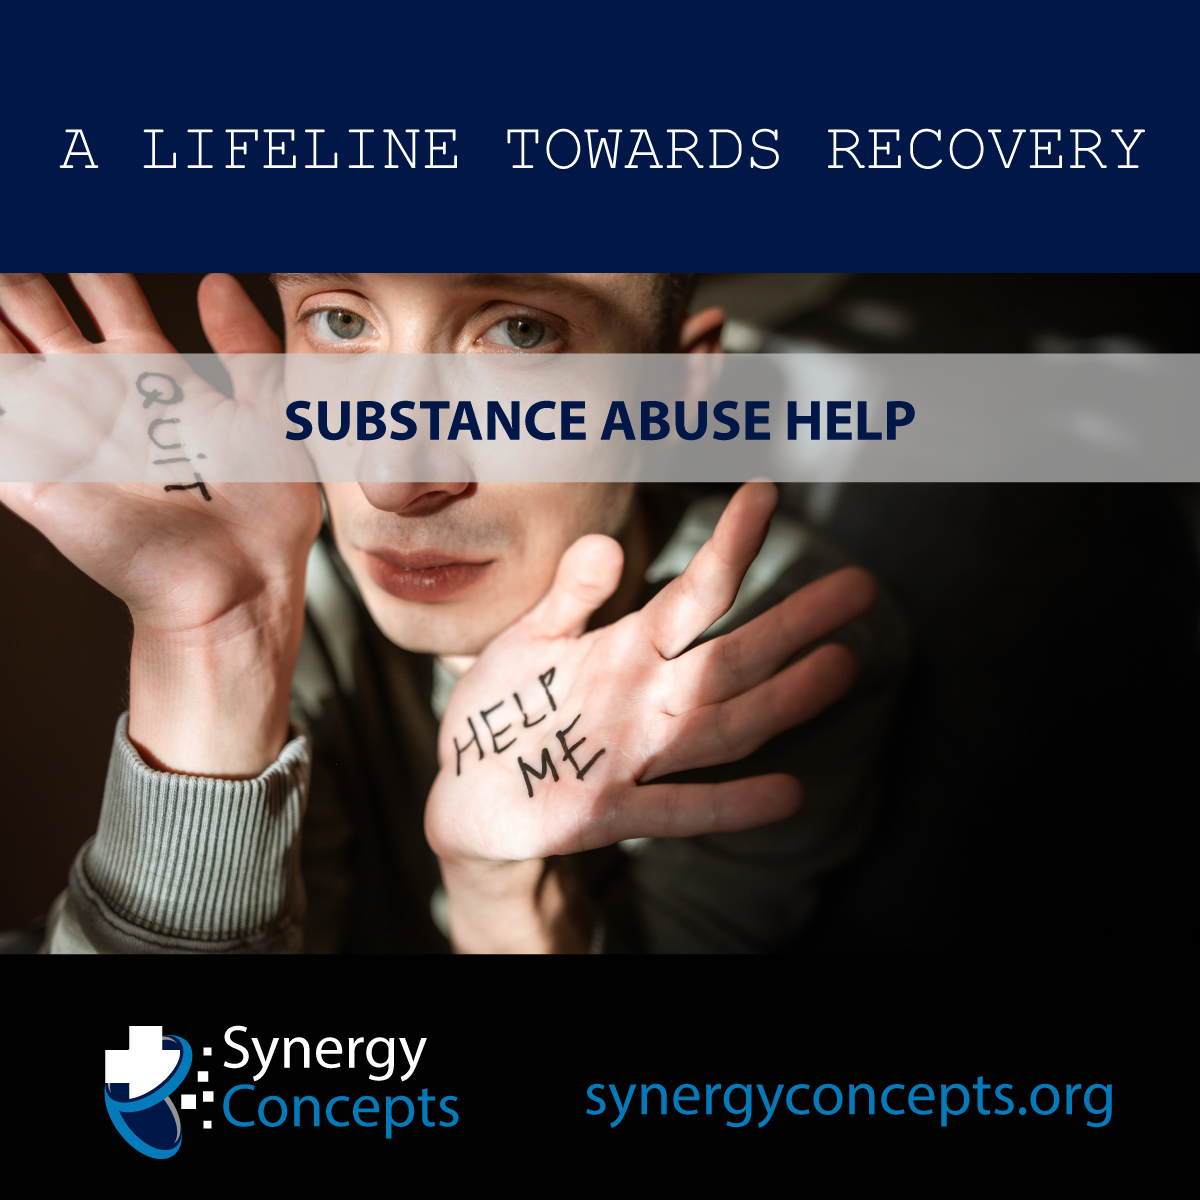 Substance Abuse Help: A Lifeline Towards Recovery